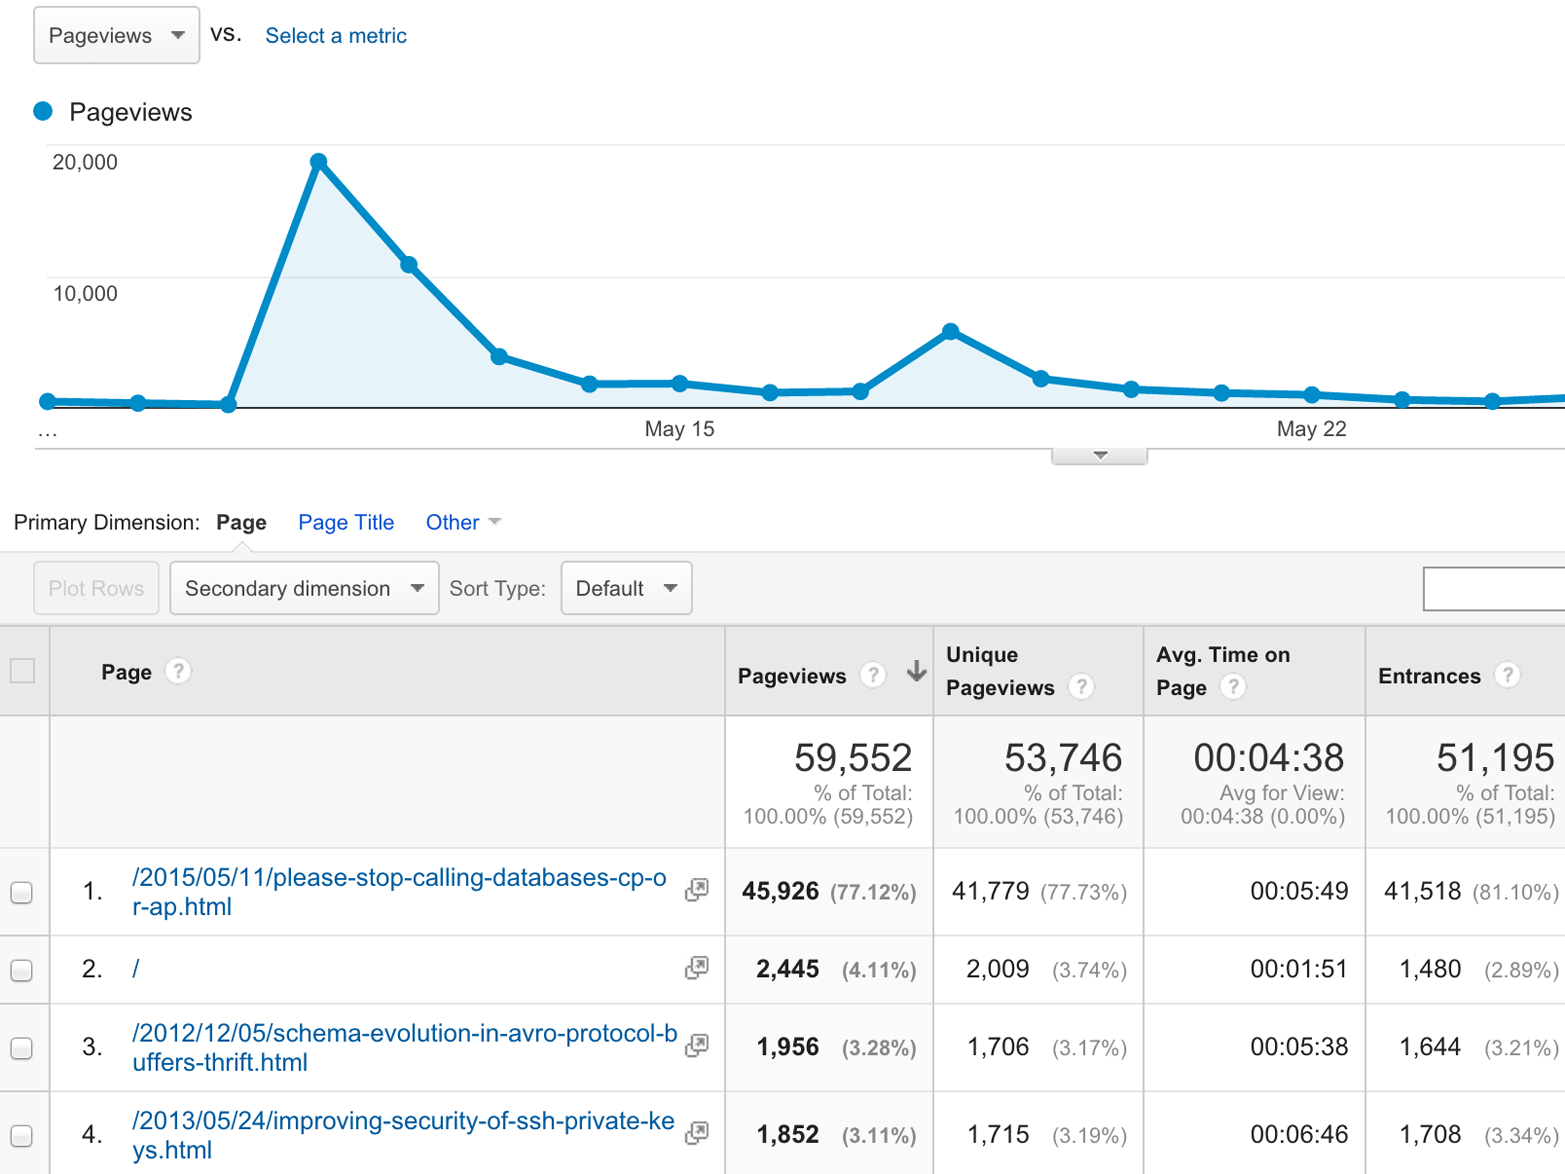 Google Analytics collects events (page views on a website) and helps you to analyze them.